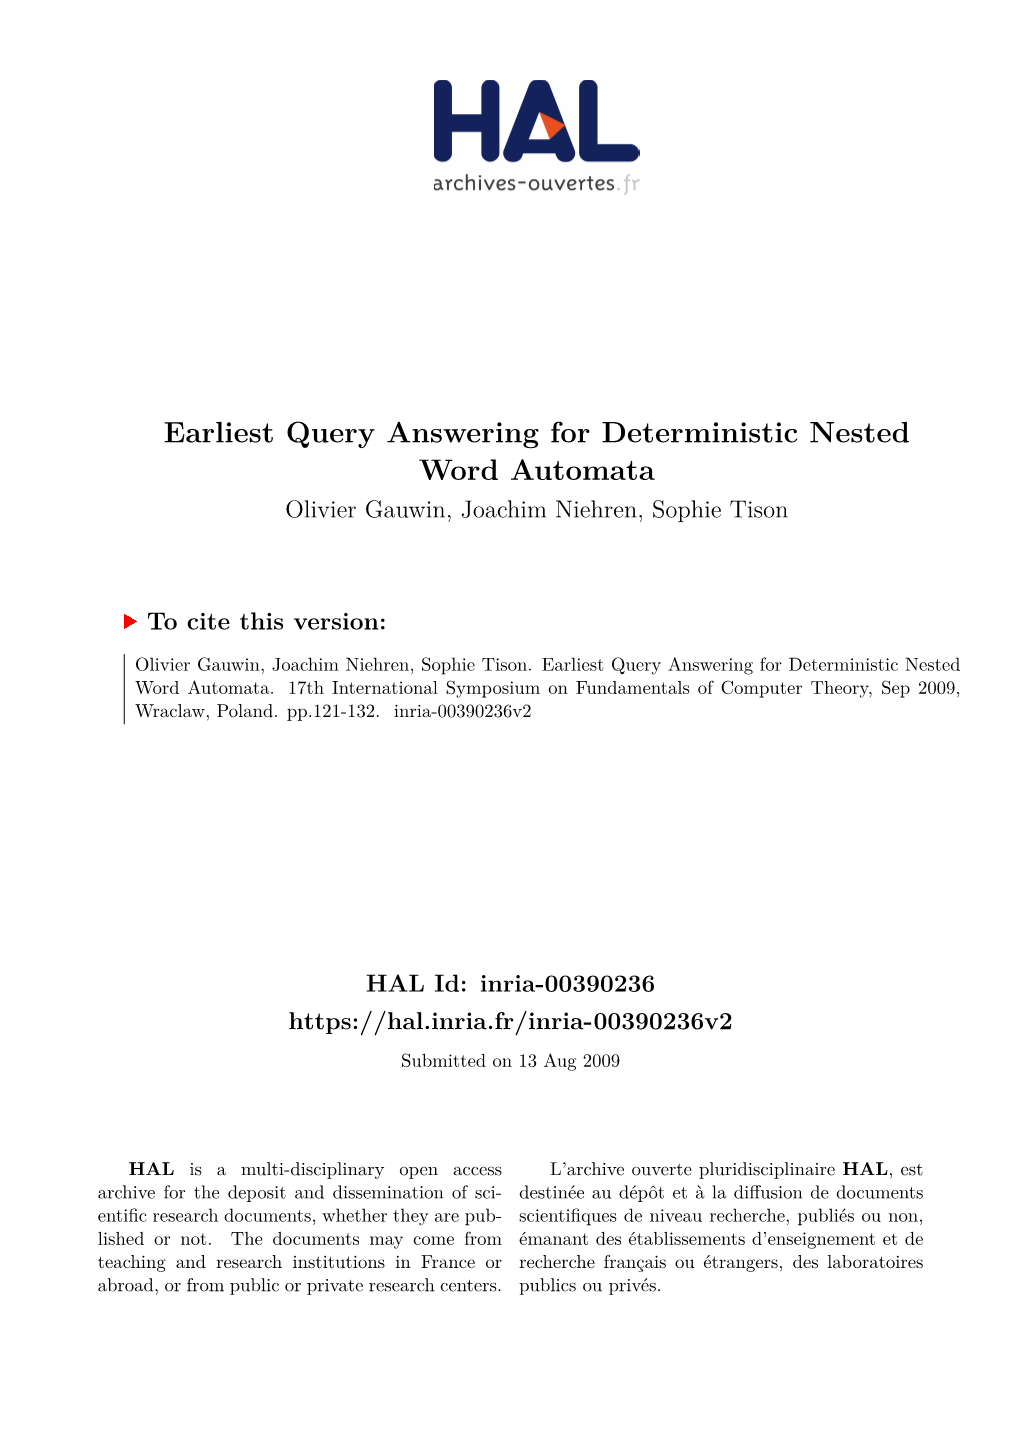 Earliest Query Answering for Deterministic Nested Word Automata Olivier Gauwin, Joachim Niehren, Sophie Tison